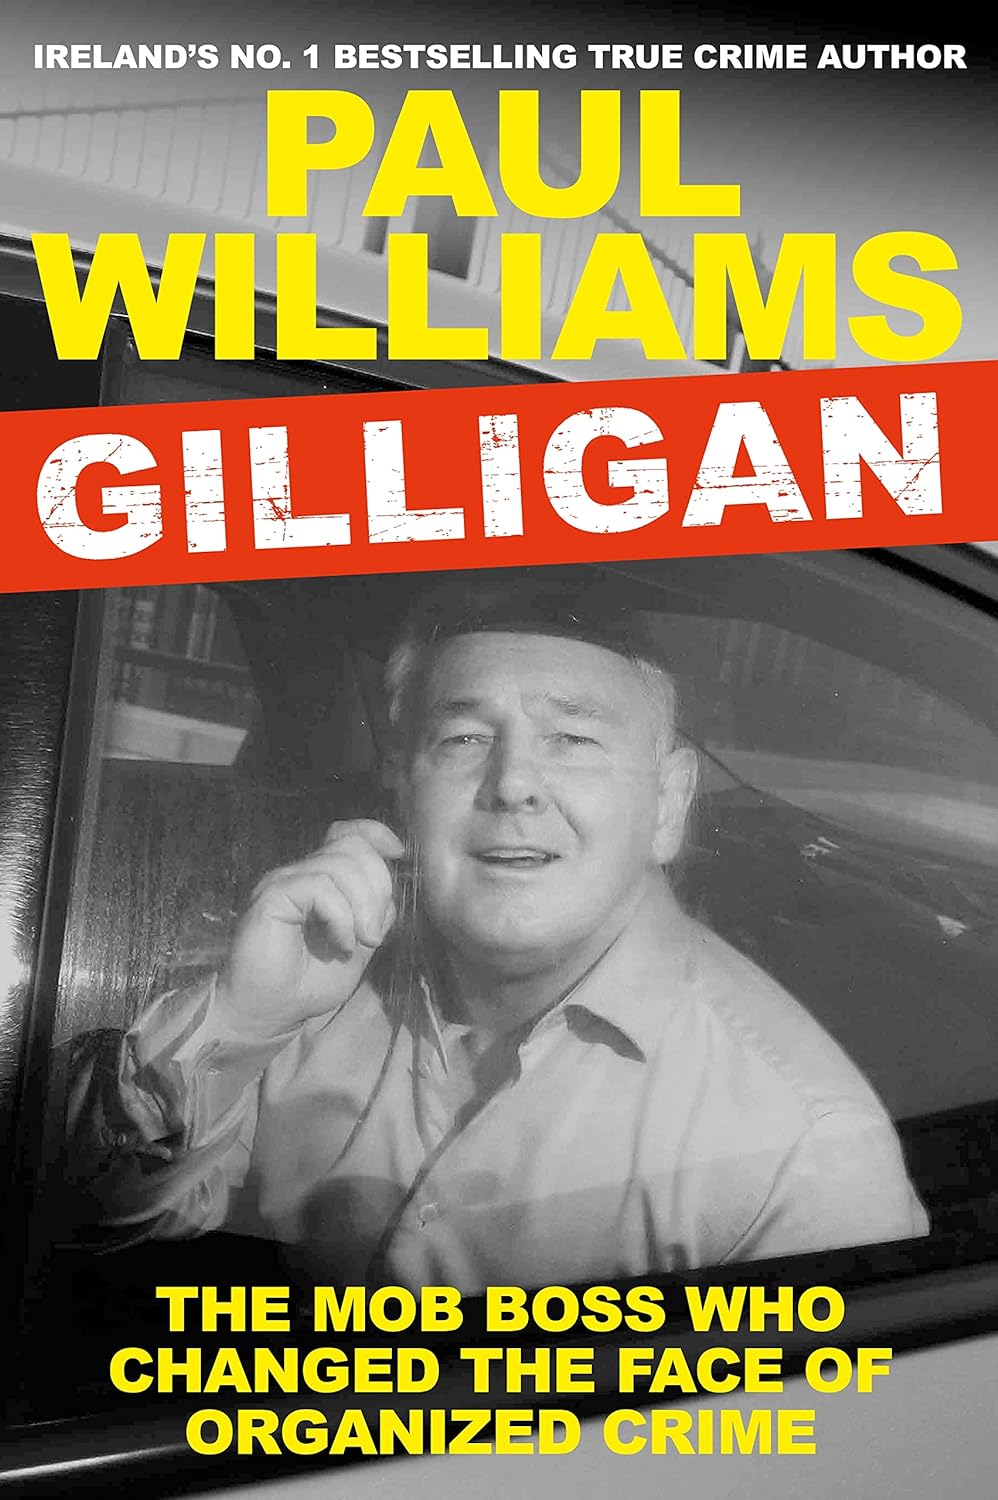 Gilligan: The Mob Boss Who Changed the Face of Organized Crime, by Paul Williams